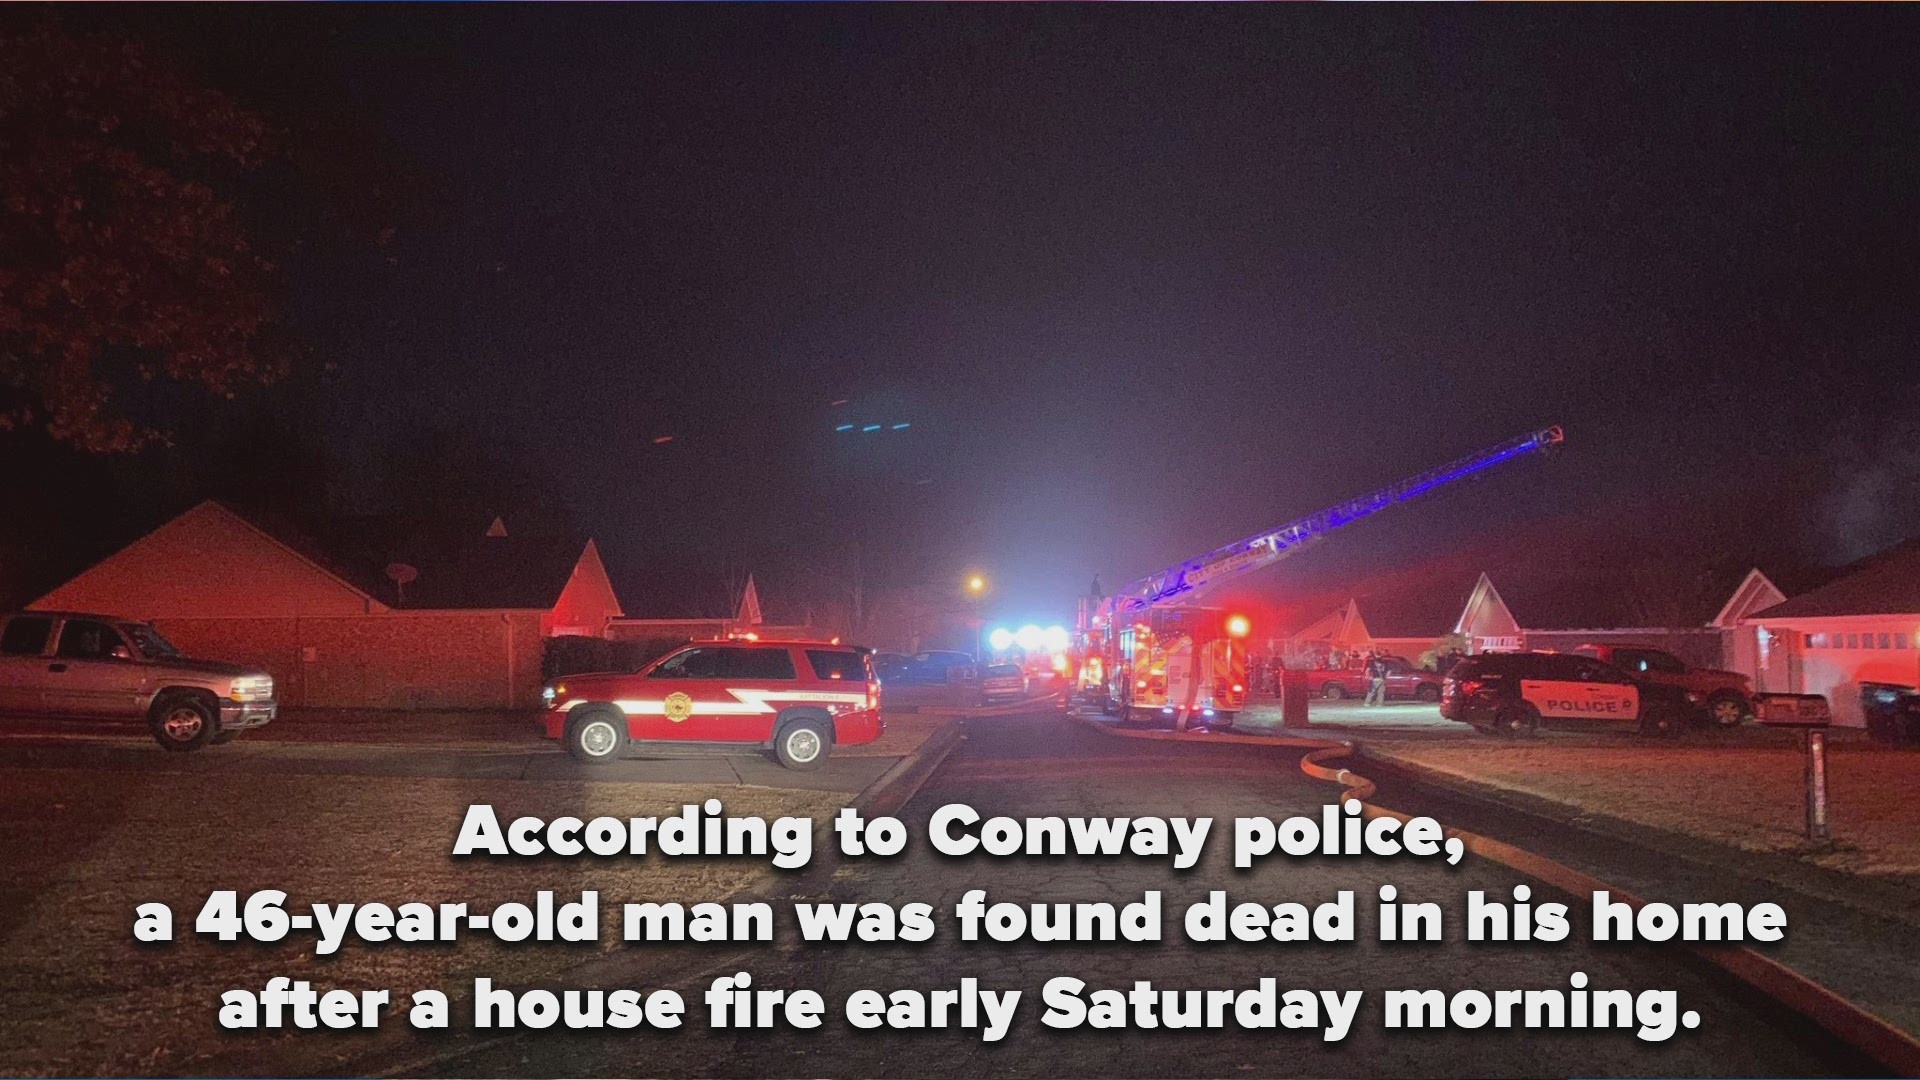 According to Conway police, a 46-year-old man was found dead in his home after a house fire early Saturday morning.